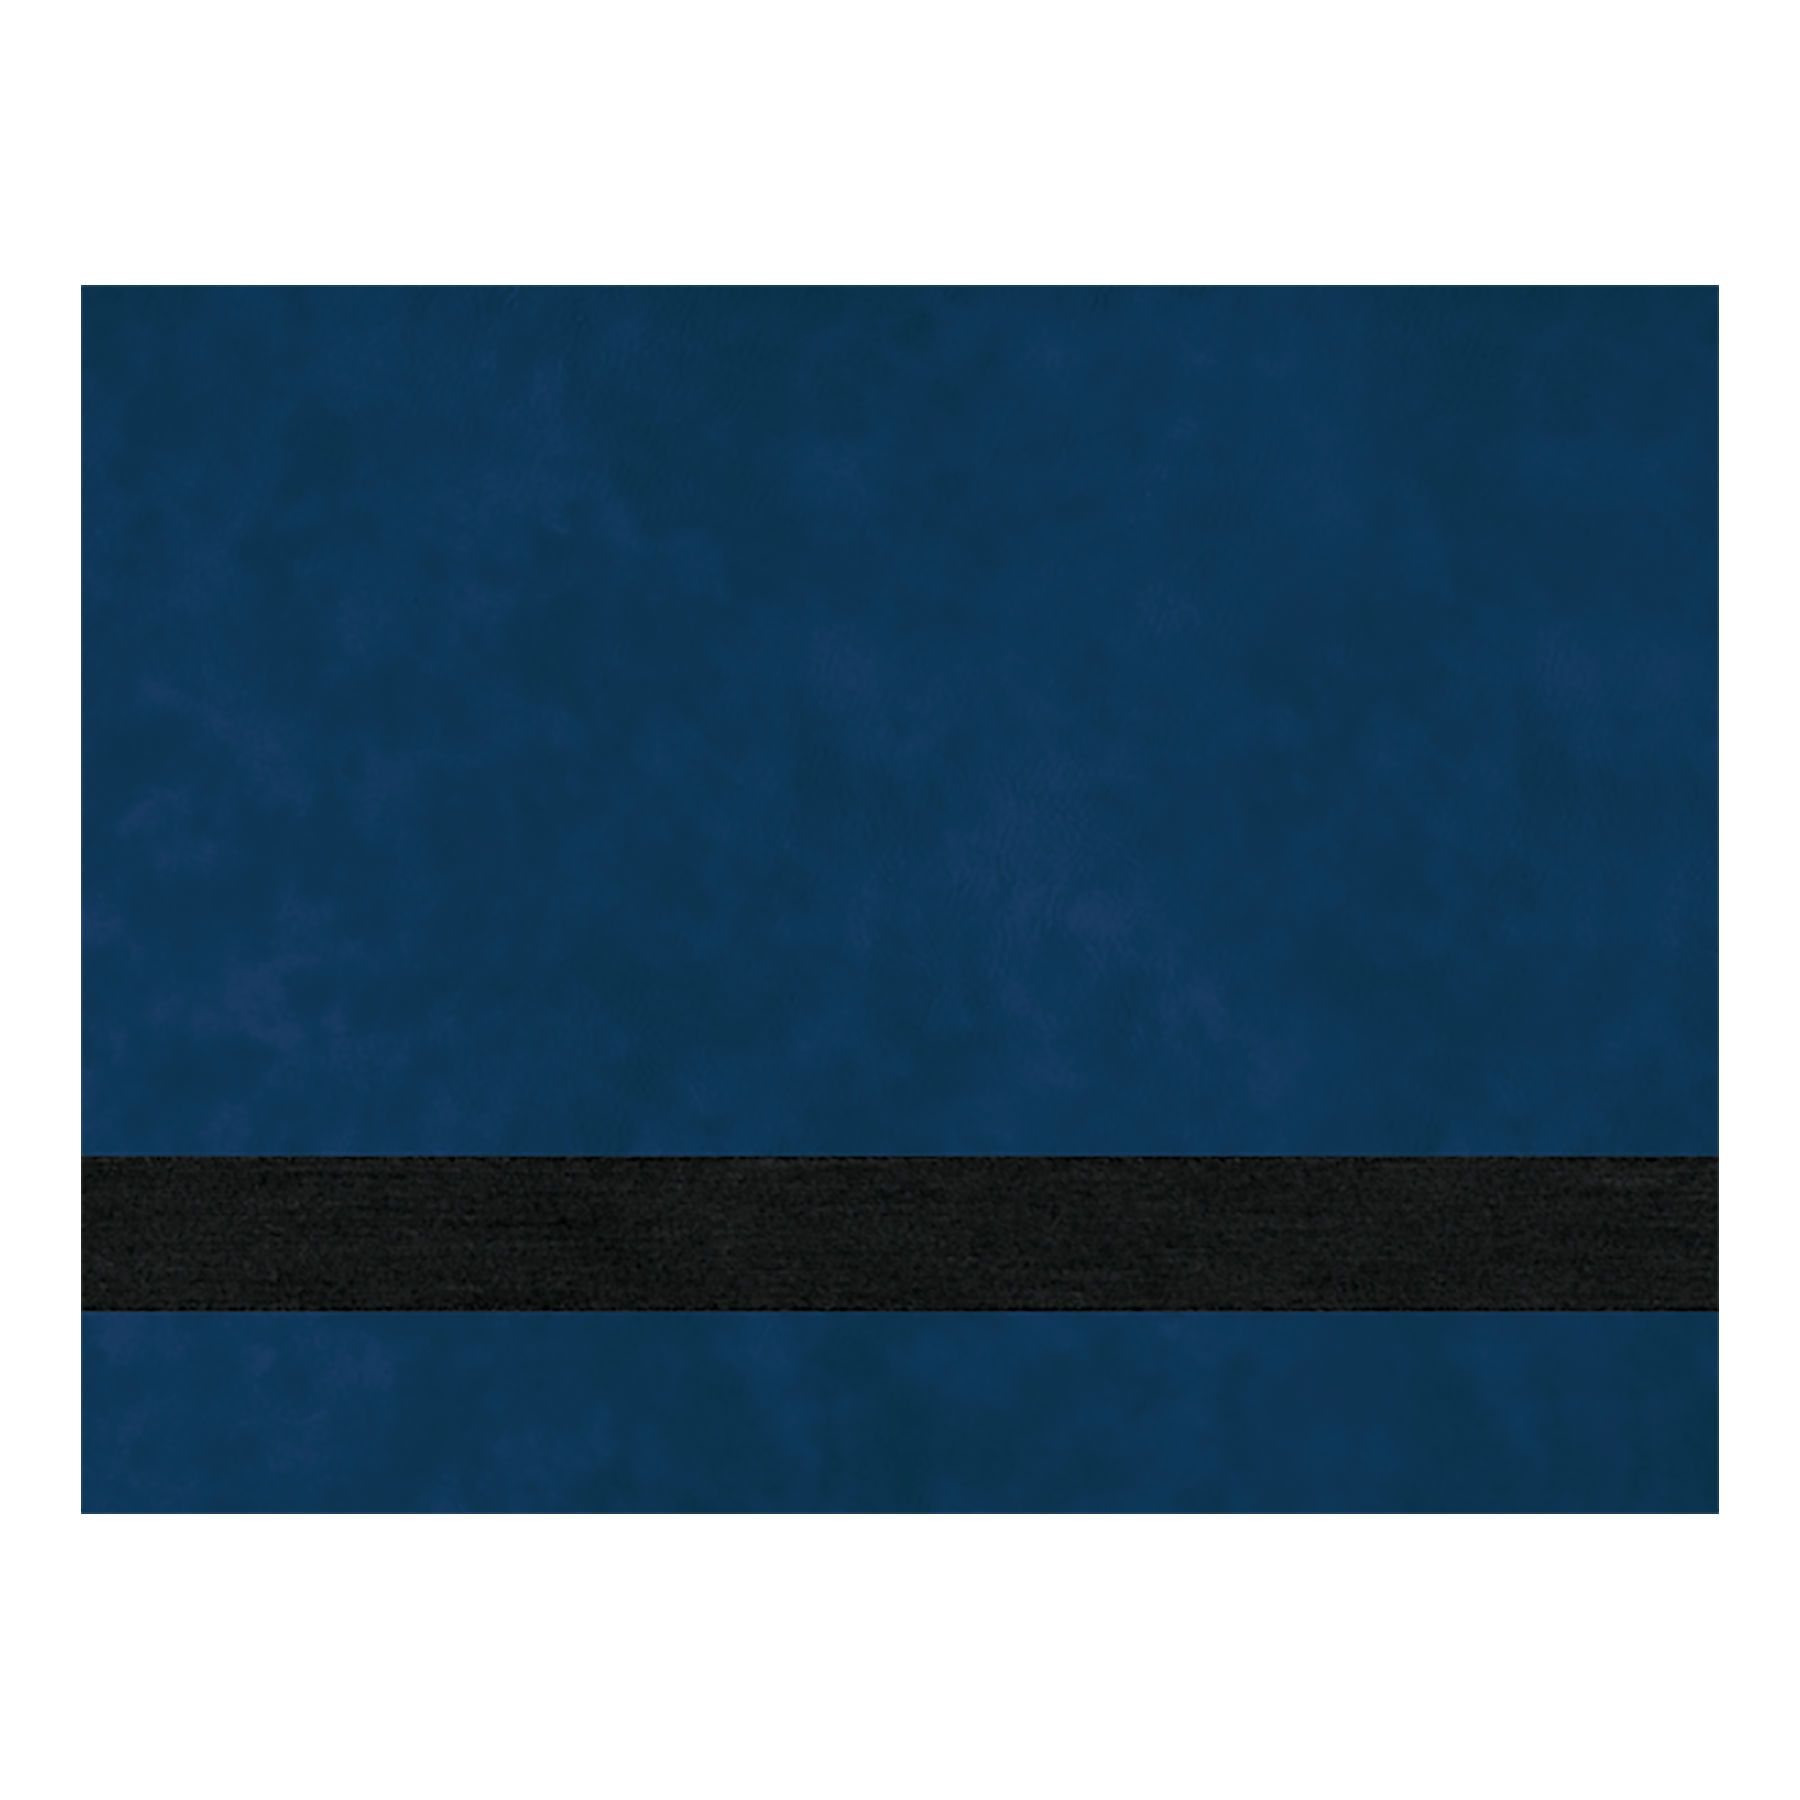 PRE-ORDER! Full Size Laserable Leatherette Sheet Stock, Boss Laser Engravers (Available Jan. 2022) Engraving Supplies Craftworks NW LS-1630 (29" x 15") Blue/Black 